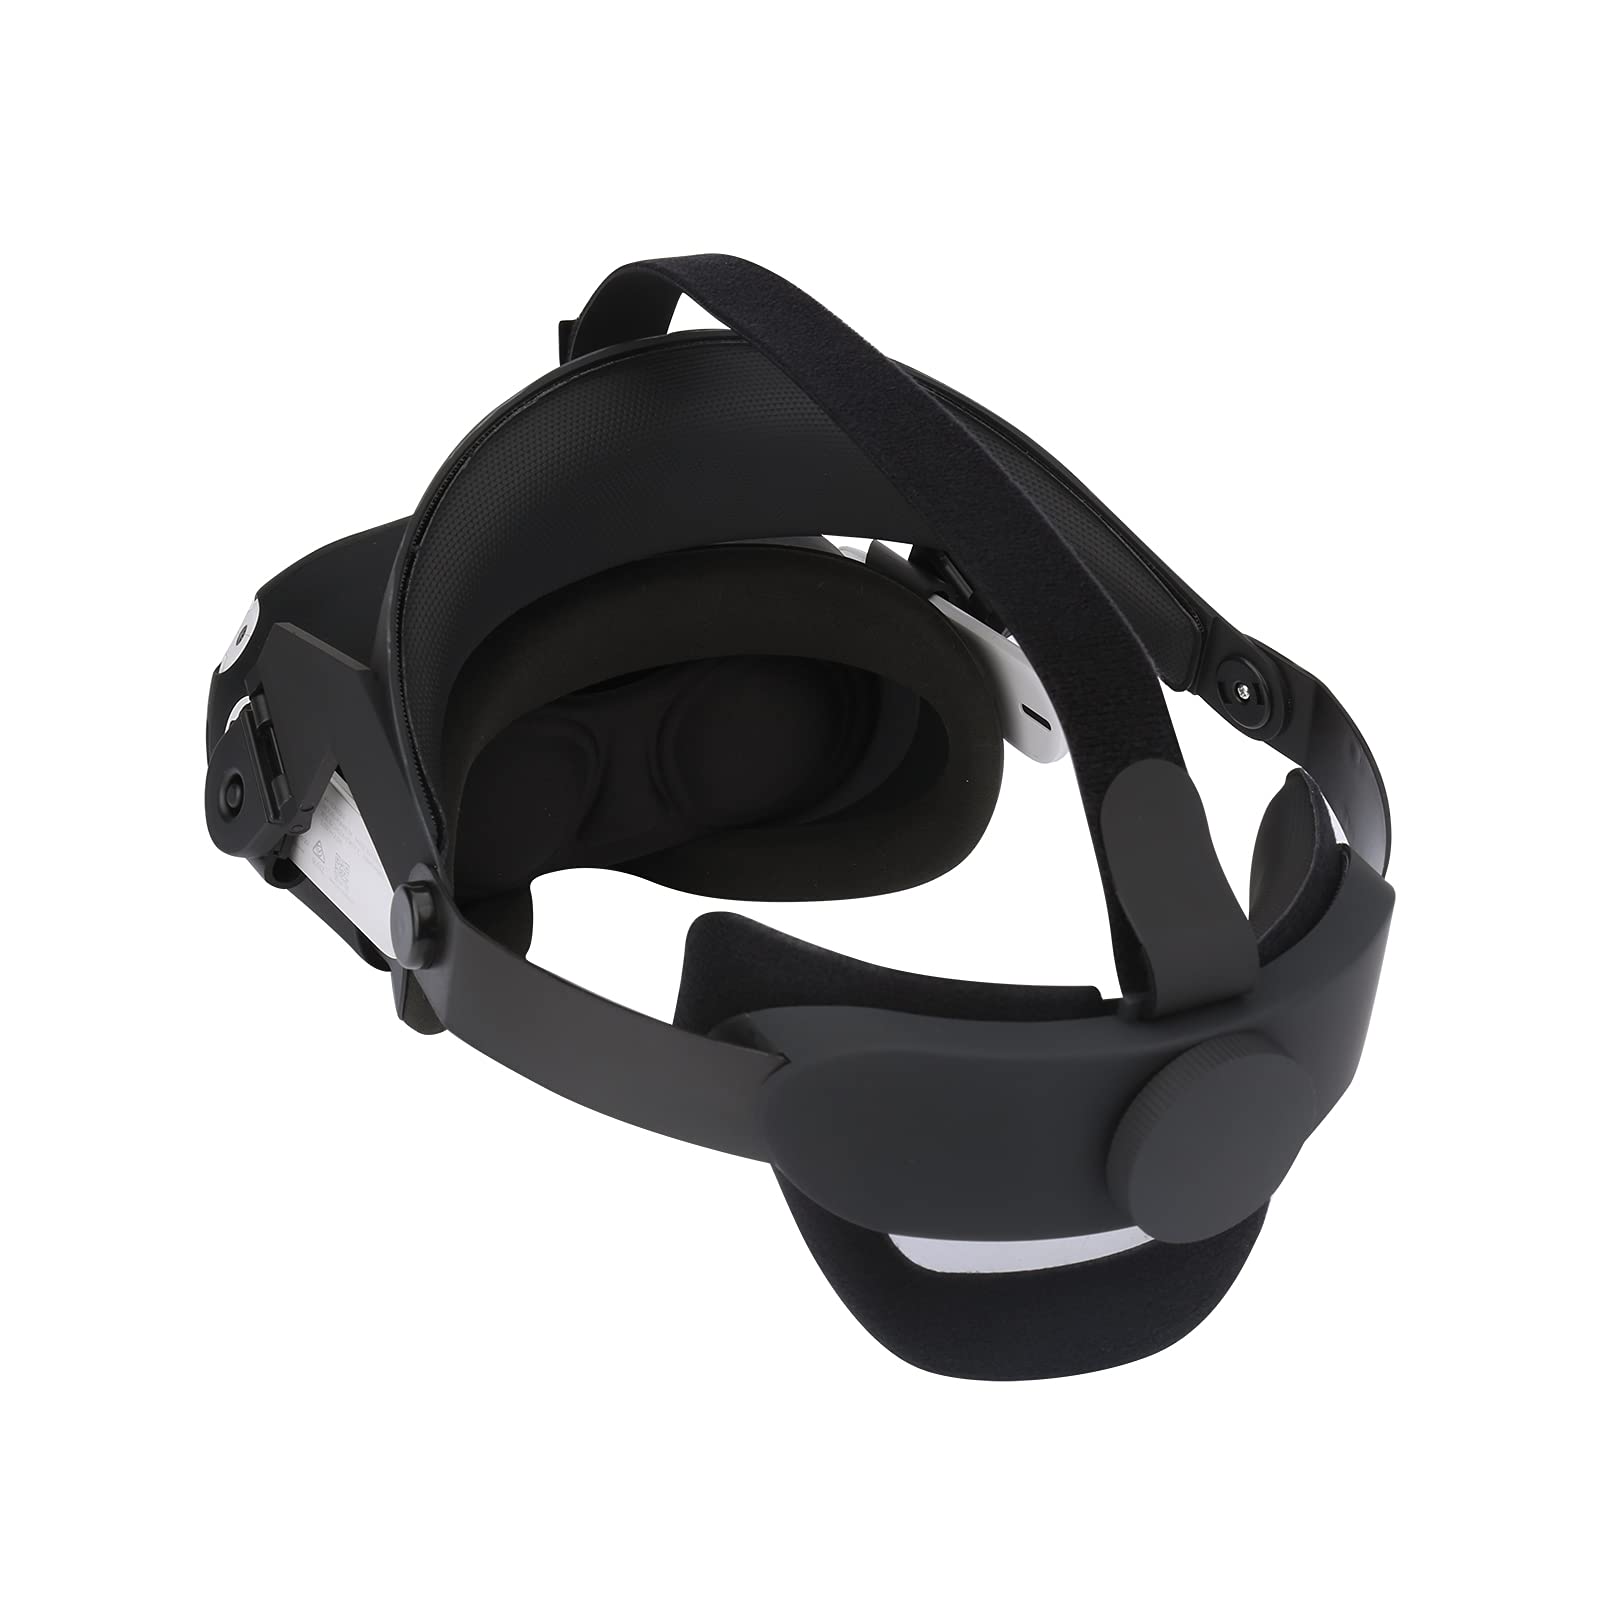 iovroigo adjustable head strap suitable for Oculus quest 2, elite strap replacement ，Enhanced Support and Comfort in VR (Black)